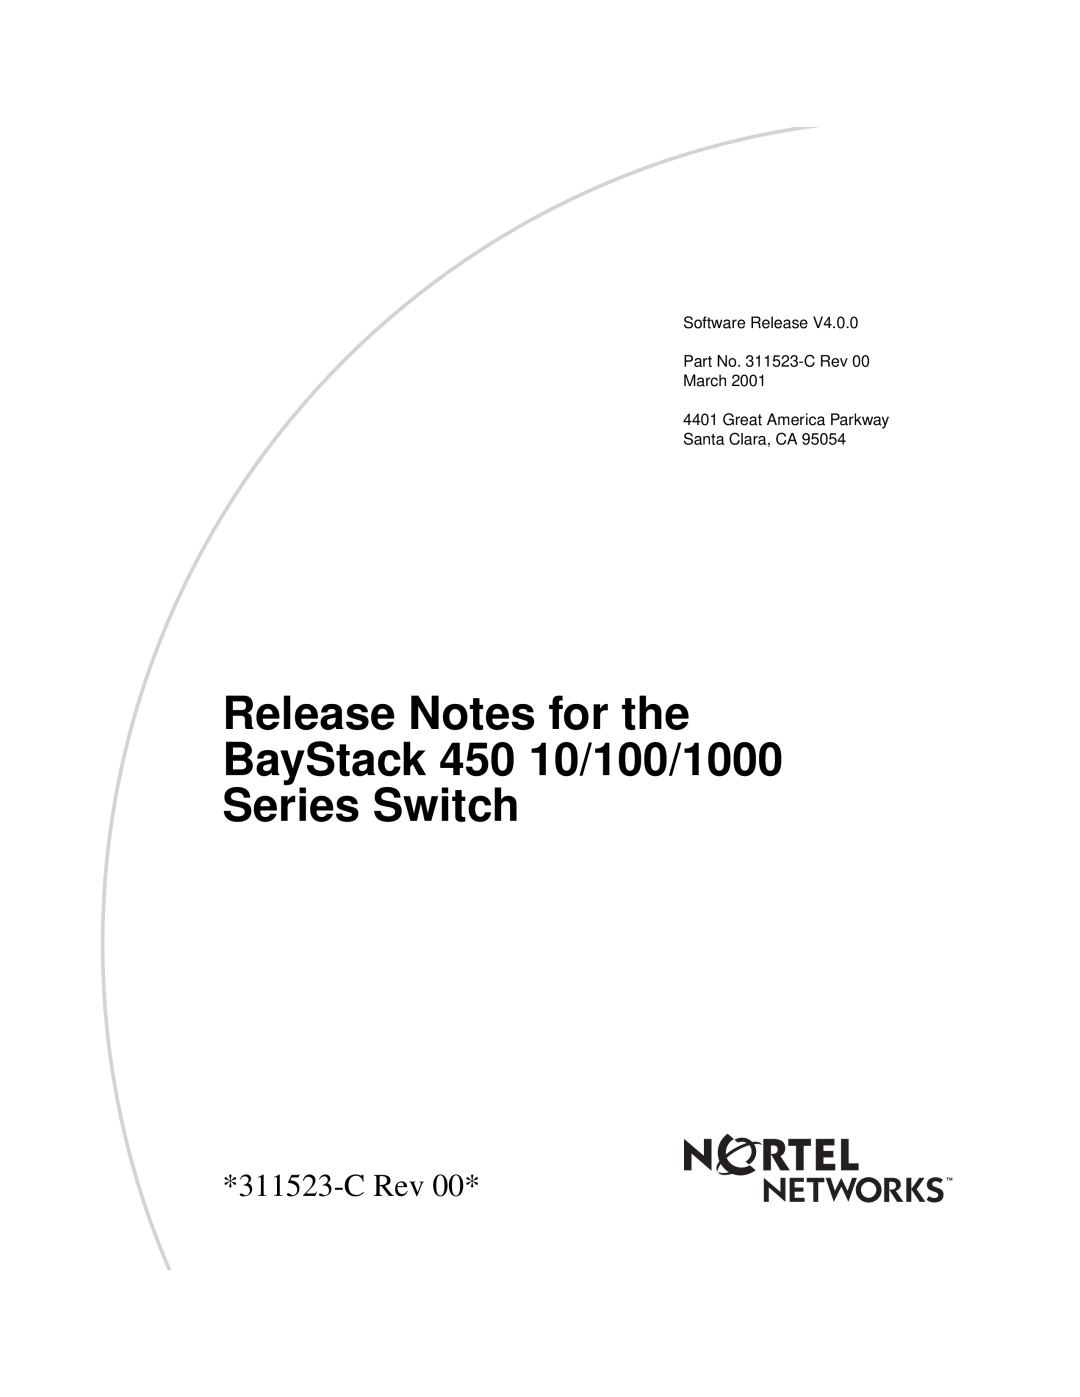 Nortel Networks manual Release Notes for the BayStack 450 10/100/1000 Series Switch, C Rev 